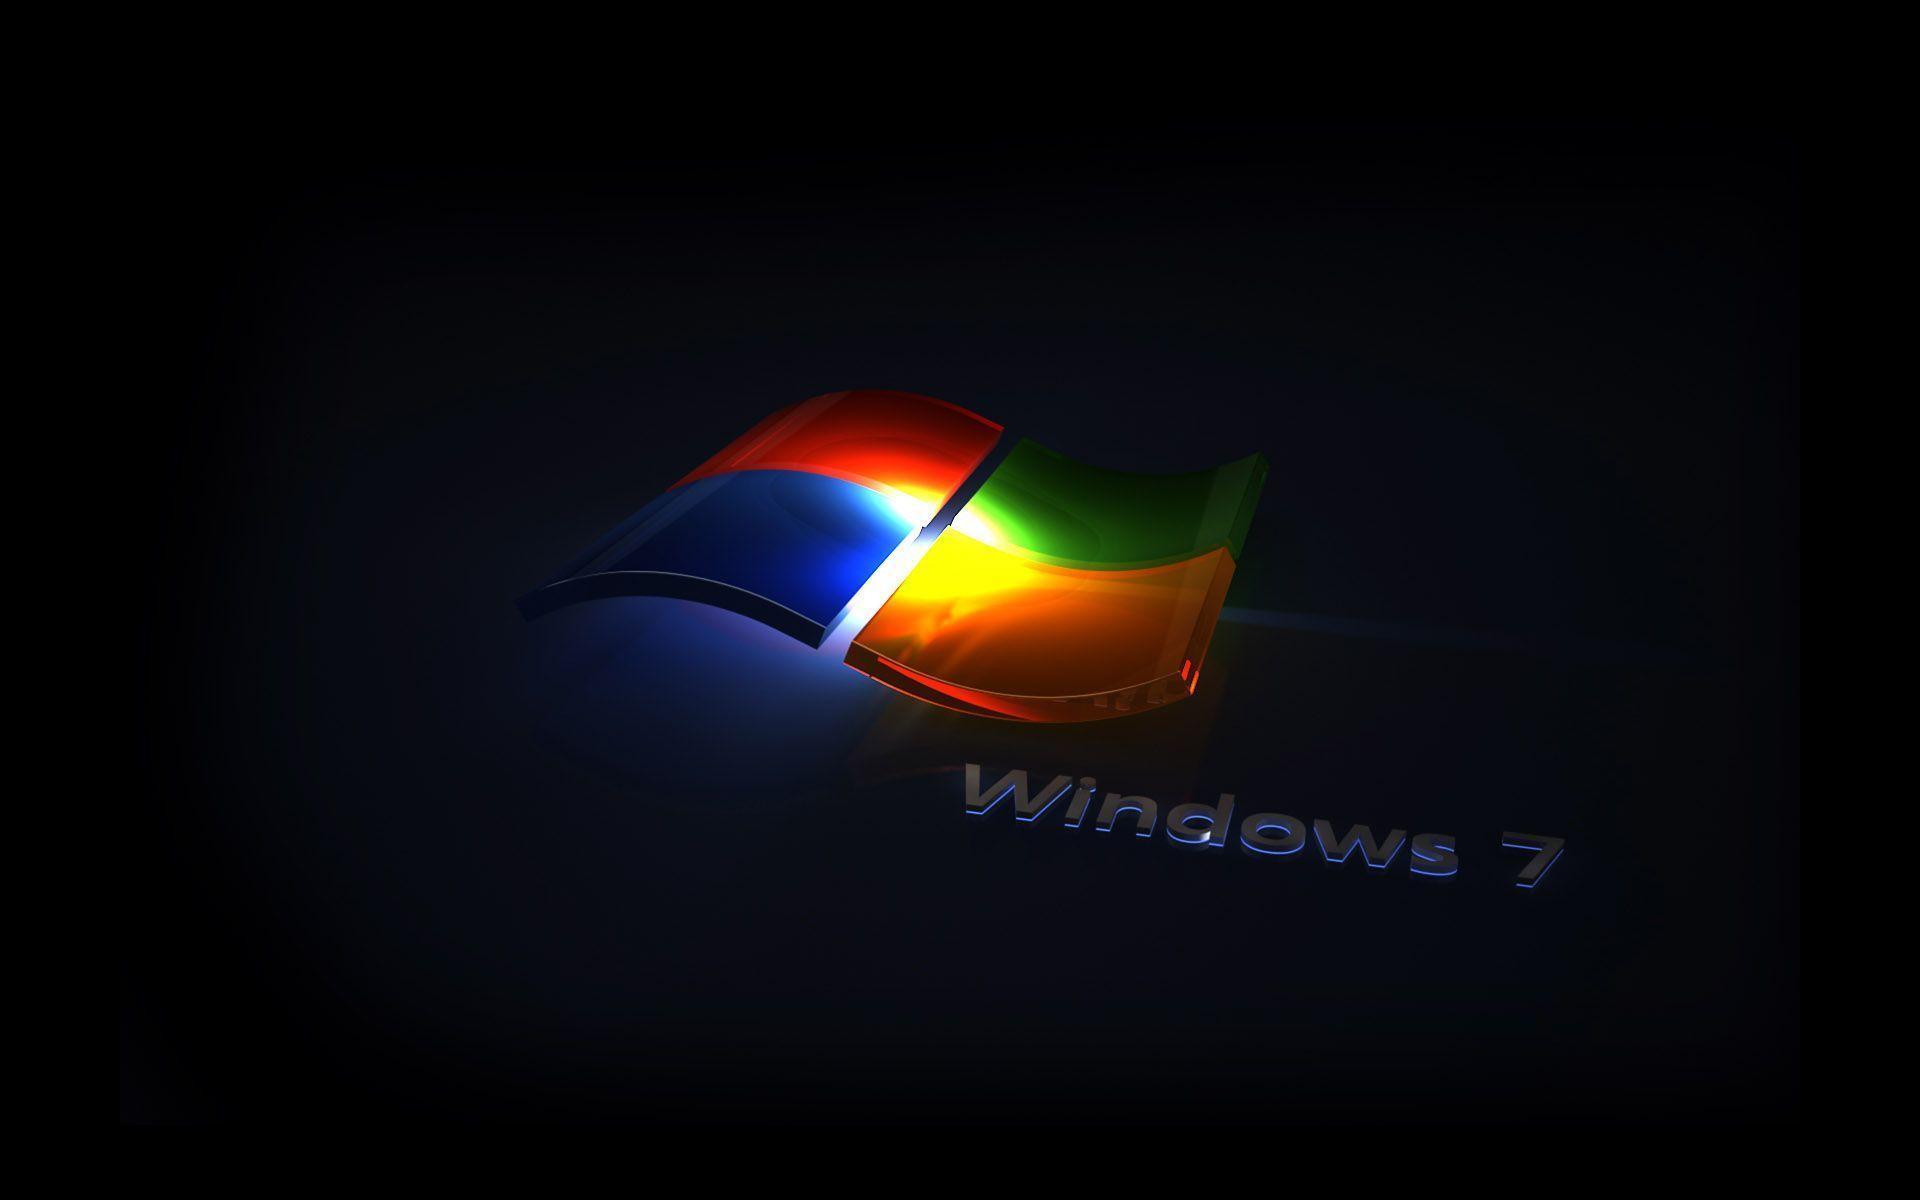 Wallpapers For > Windows 7 Ultimate Wallpapers 1600x900